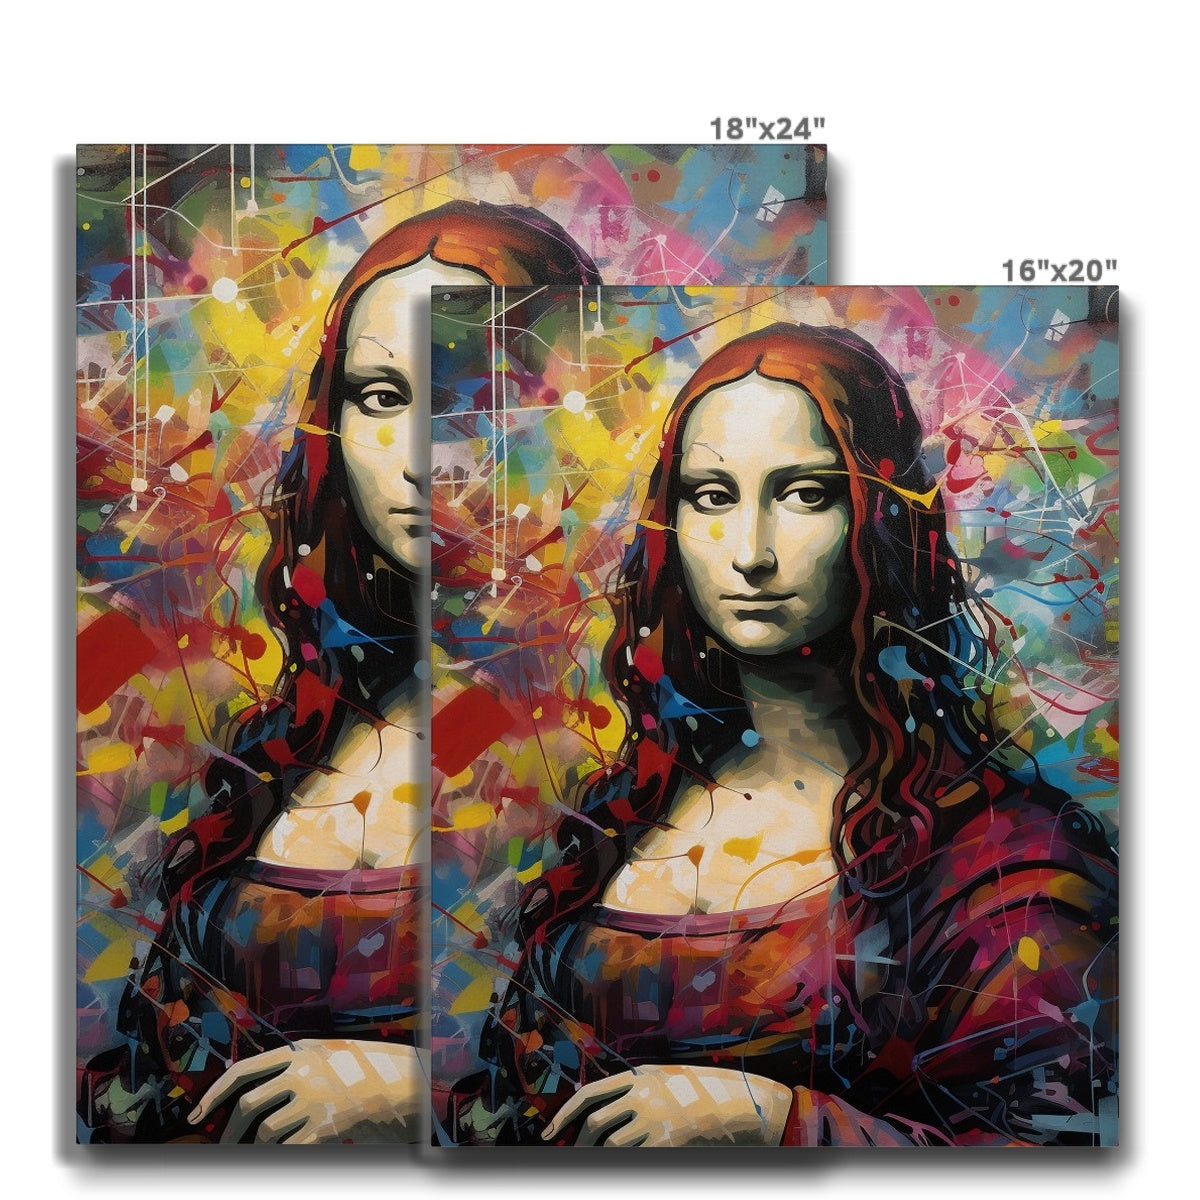 Mona Lisa Meets "Just Stop Oil": Limited Edition Canvas